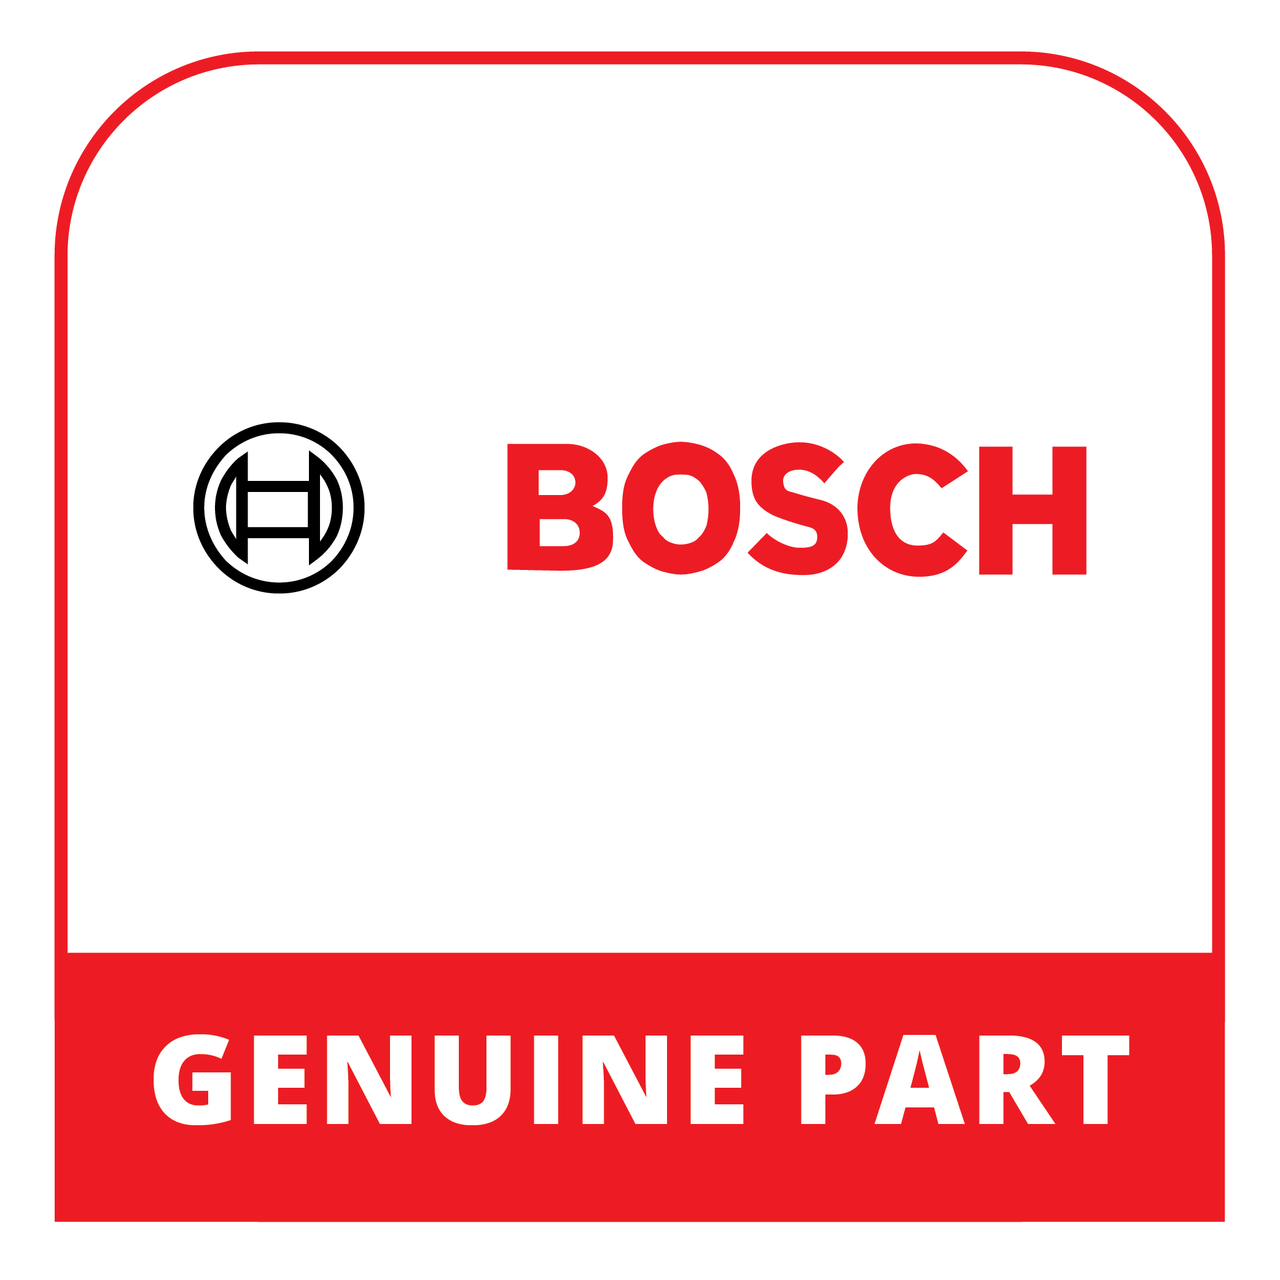 Bosch (Thermador) 11060286 - Front Panel - Genuine Bosch (Thermador) Part